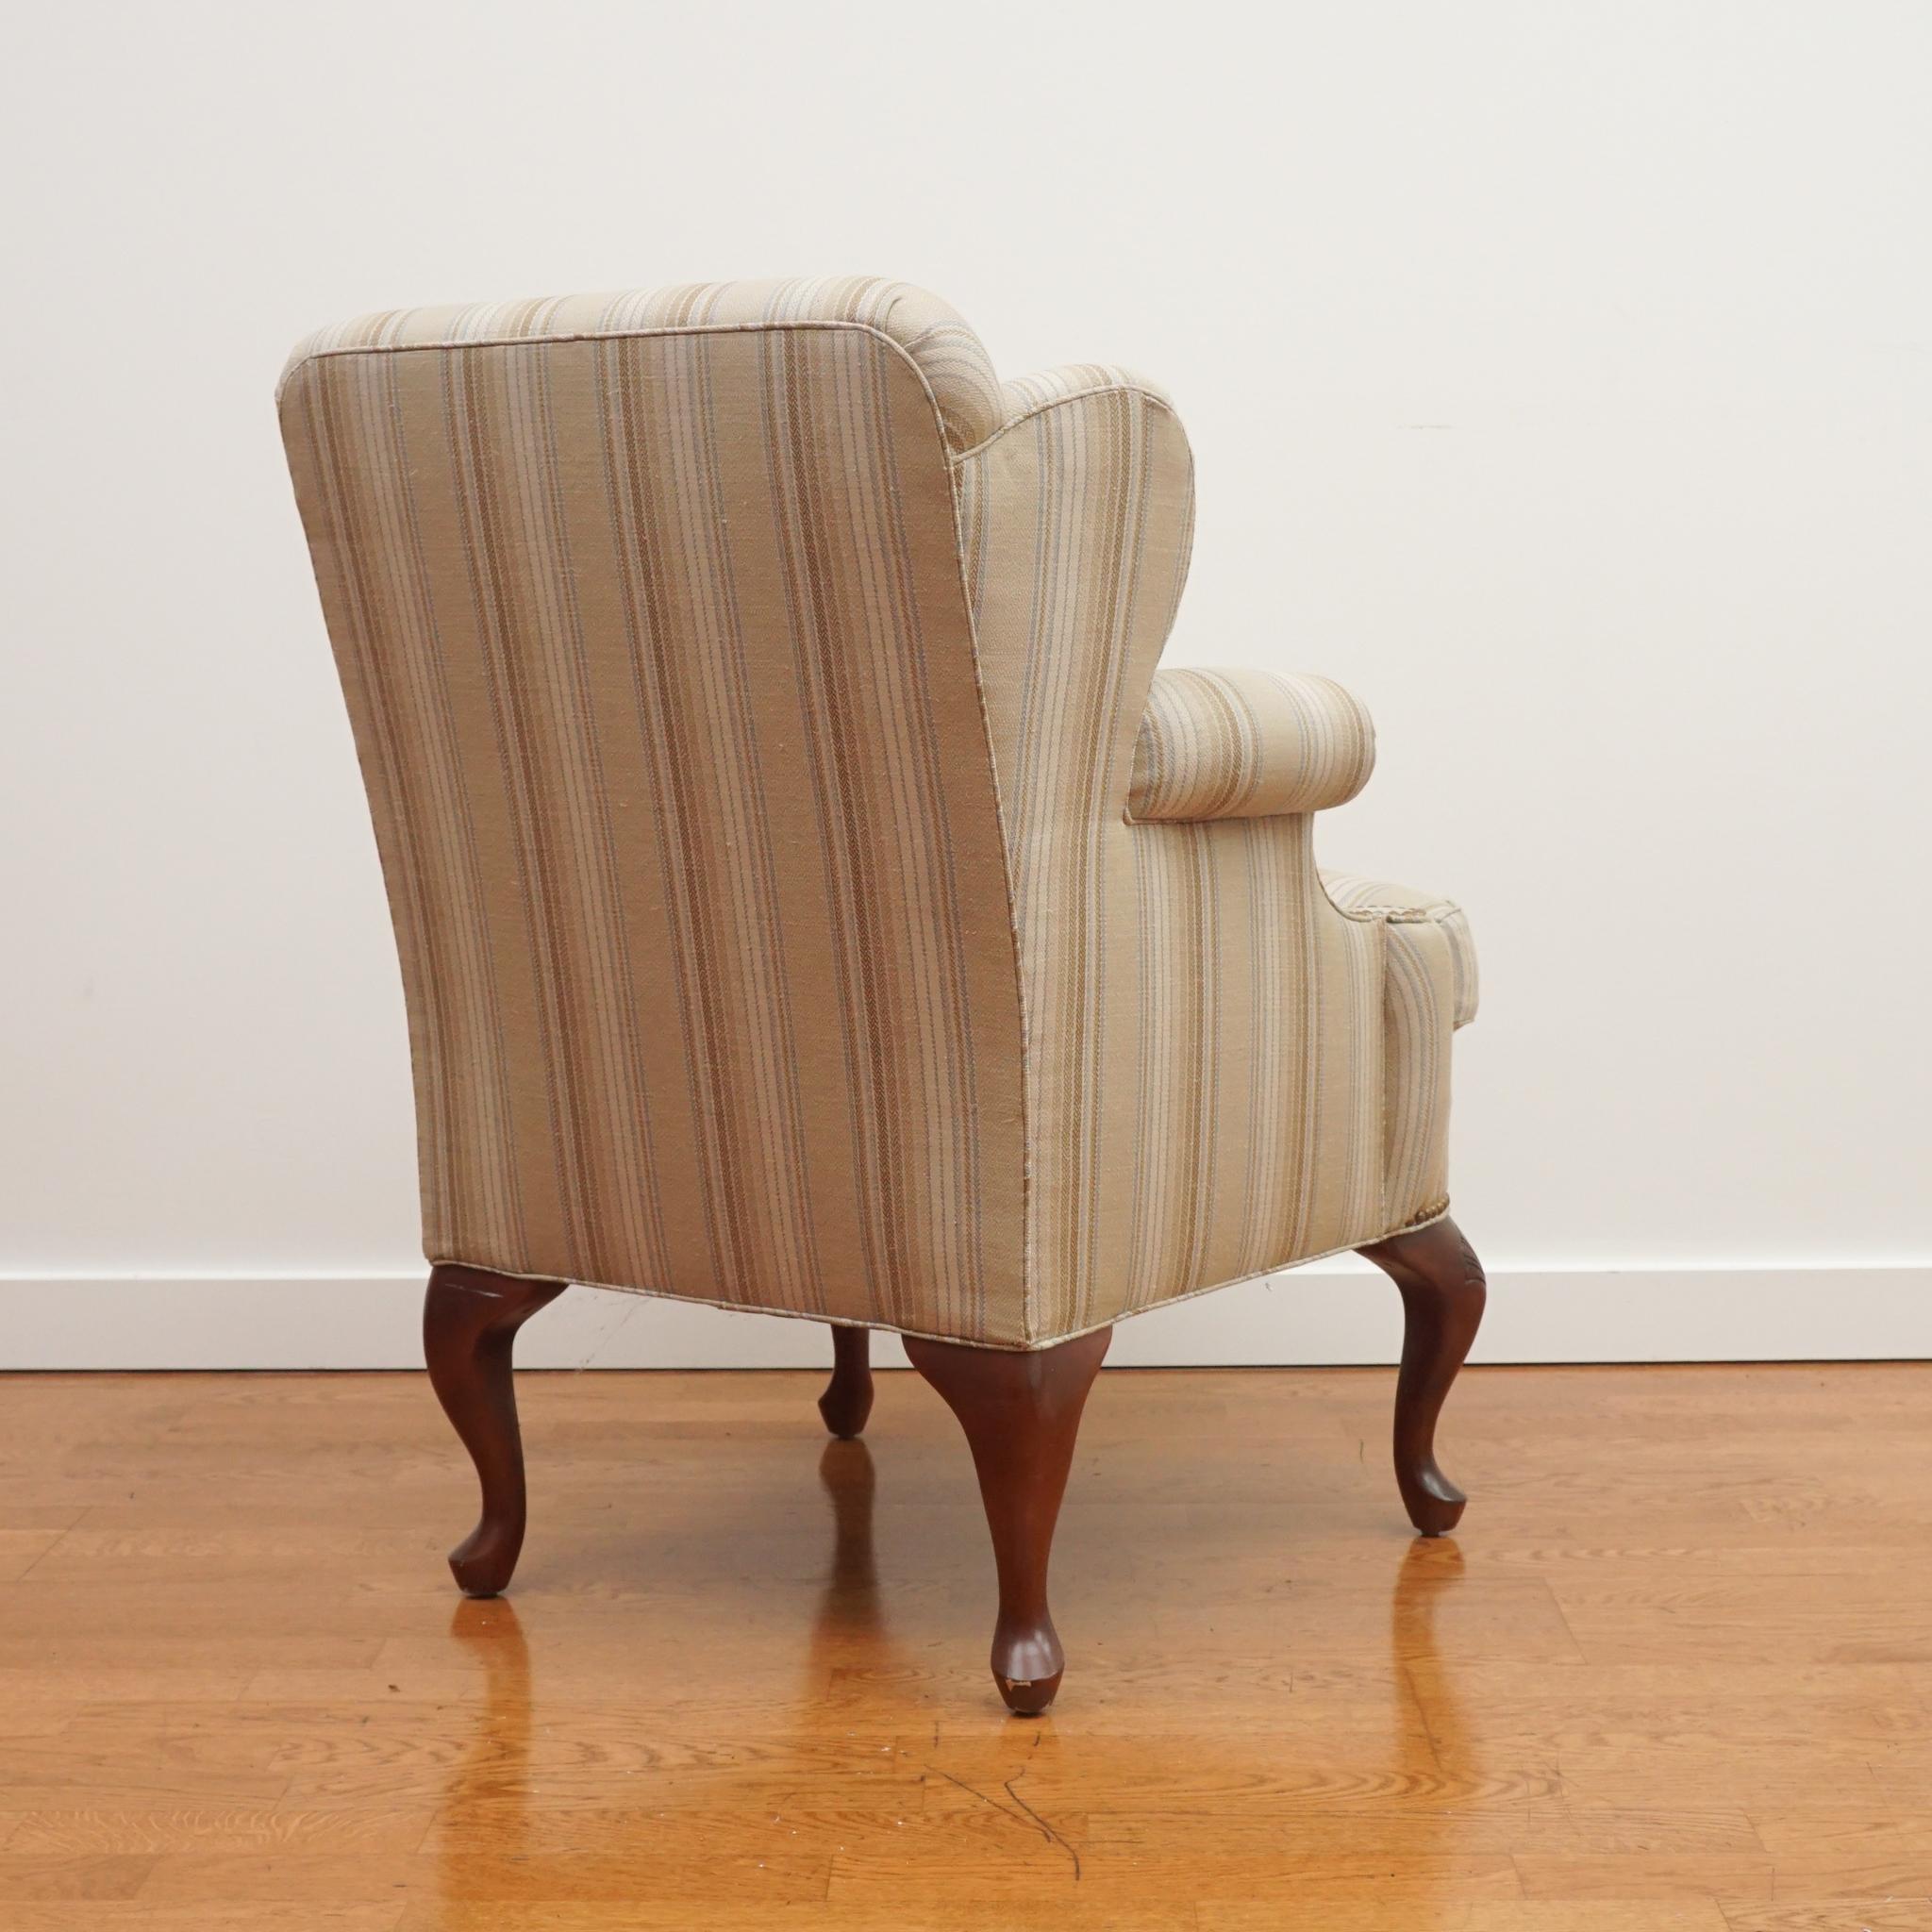 Machine-Made Petite Queen Anne-Style Wing Chair